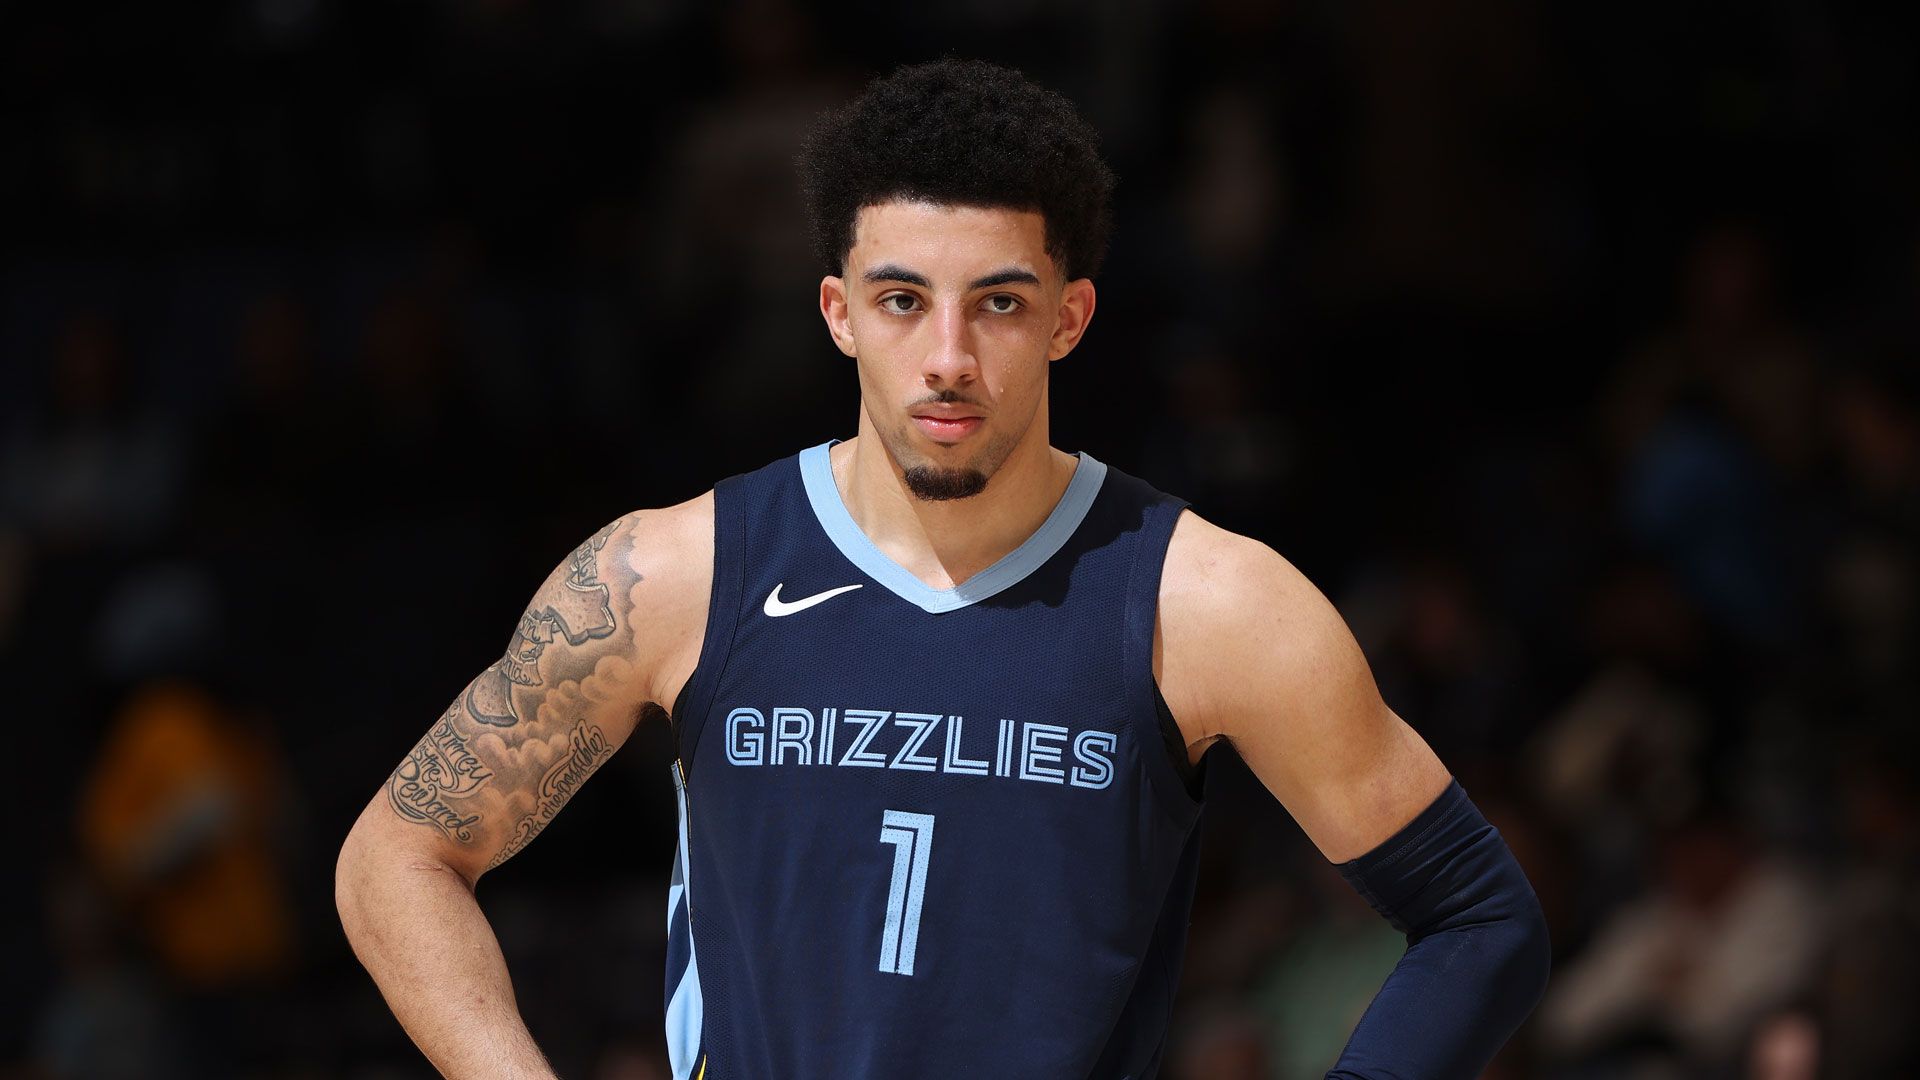 MikeCheck: Pippen’s first NBA start caps January’s breakout development for Grizzlies prospects